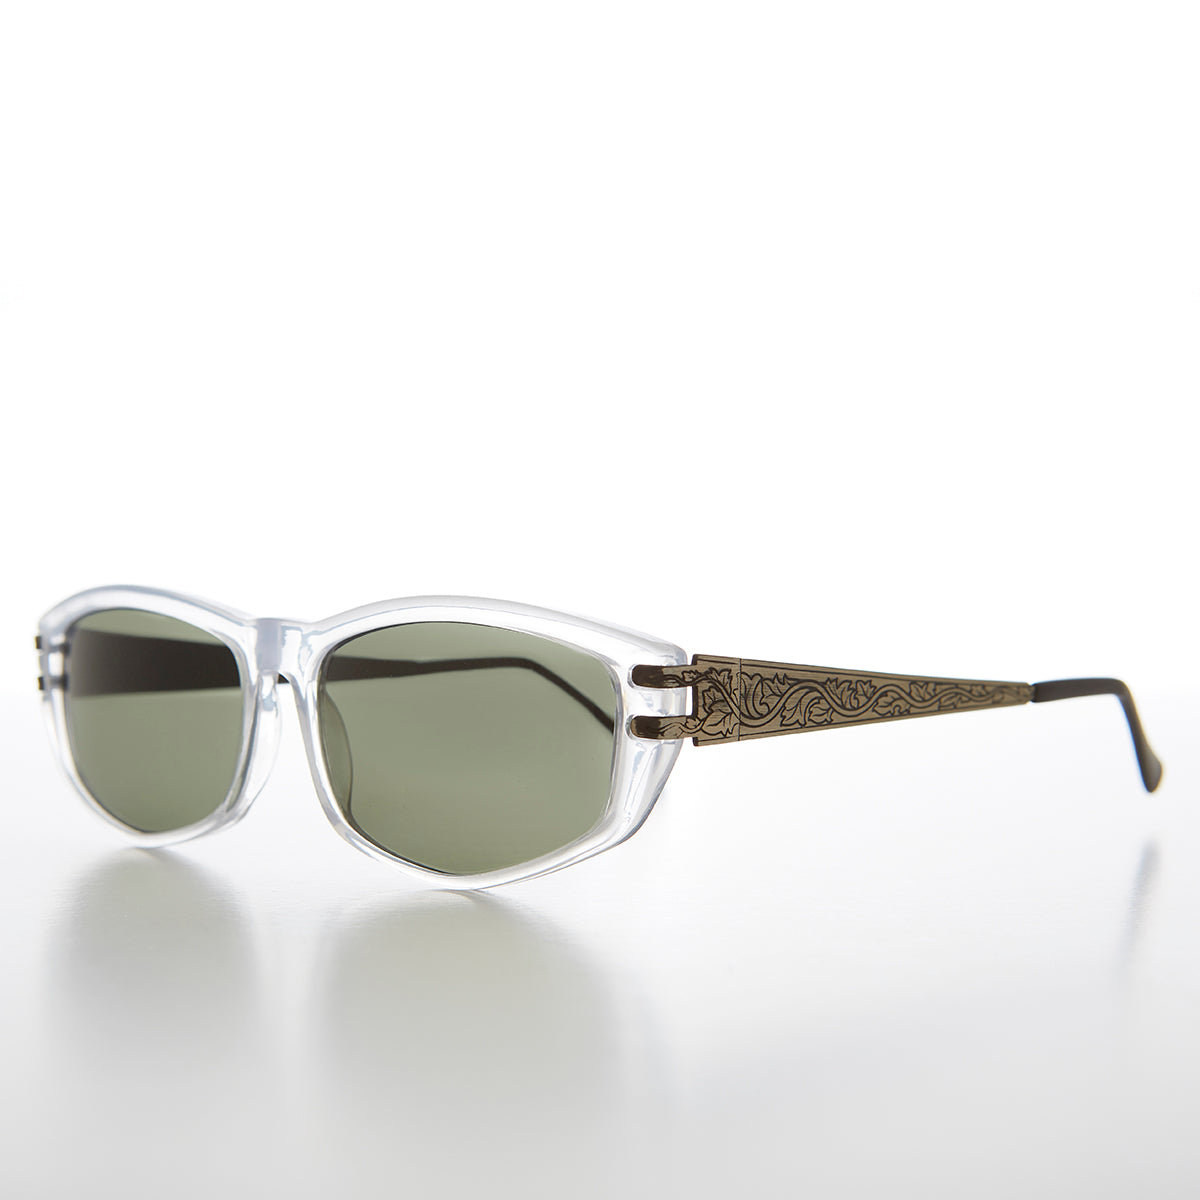 Rectangular Sunglass with Art Deco Etched Temples